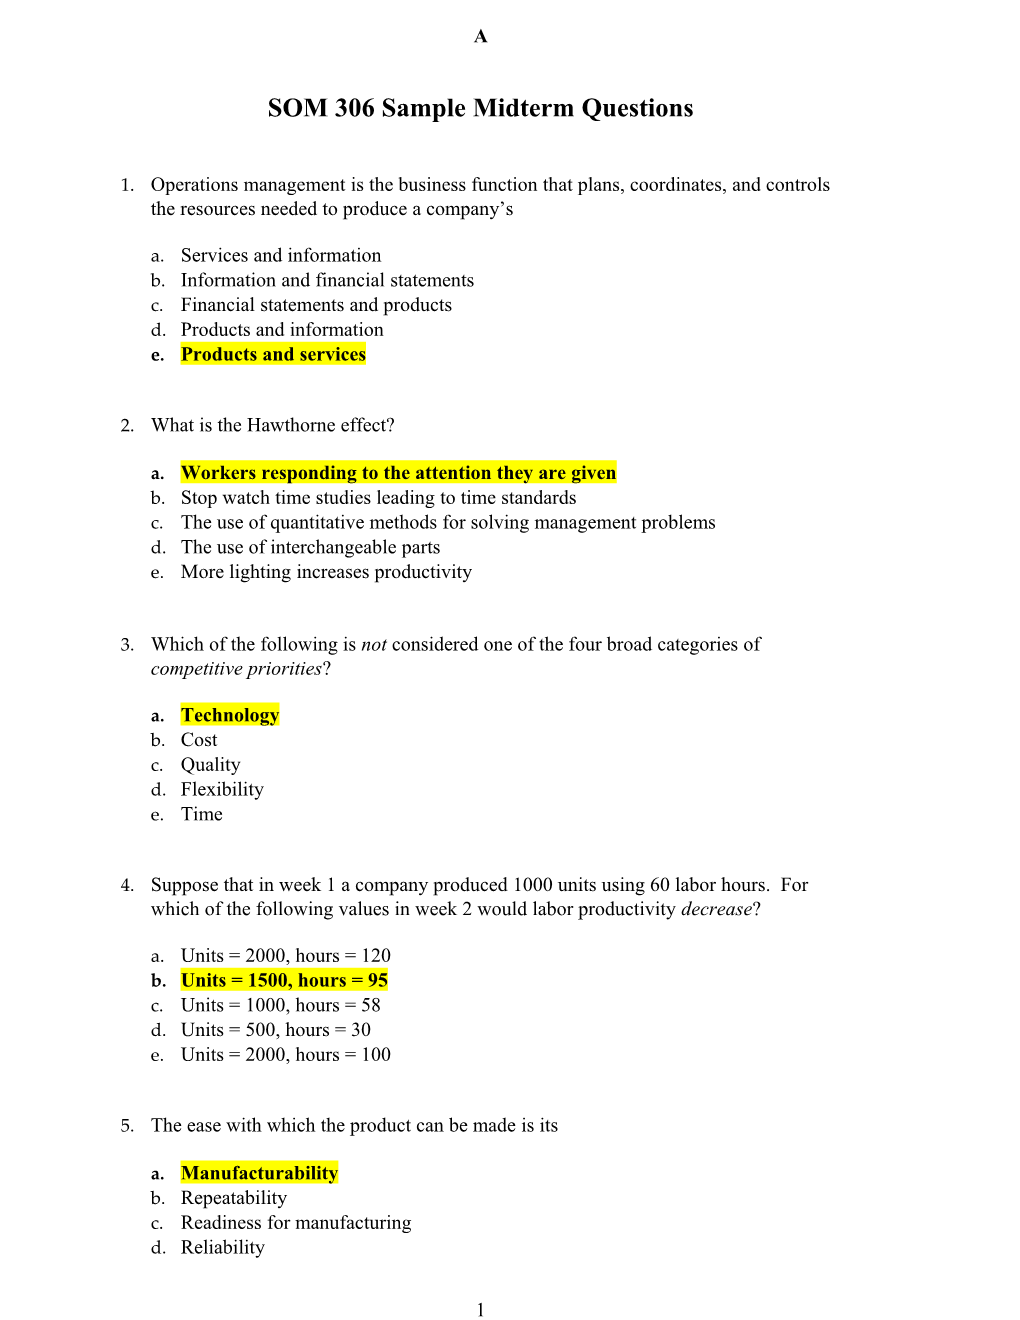 SOM 306 Sample Midterm Questions